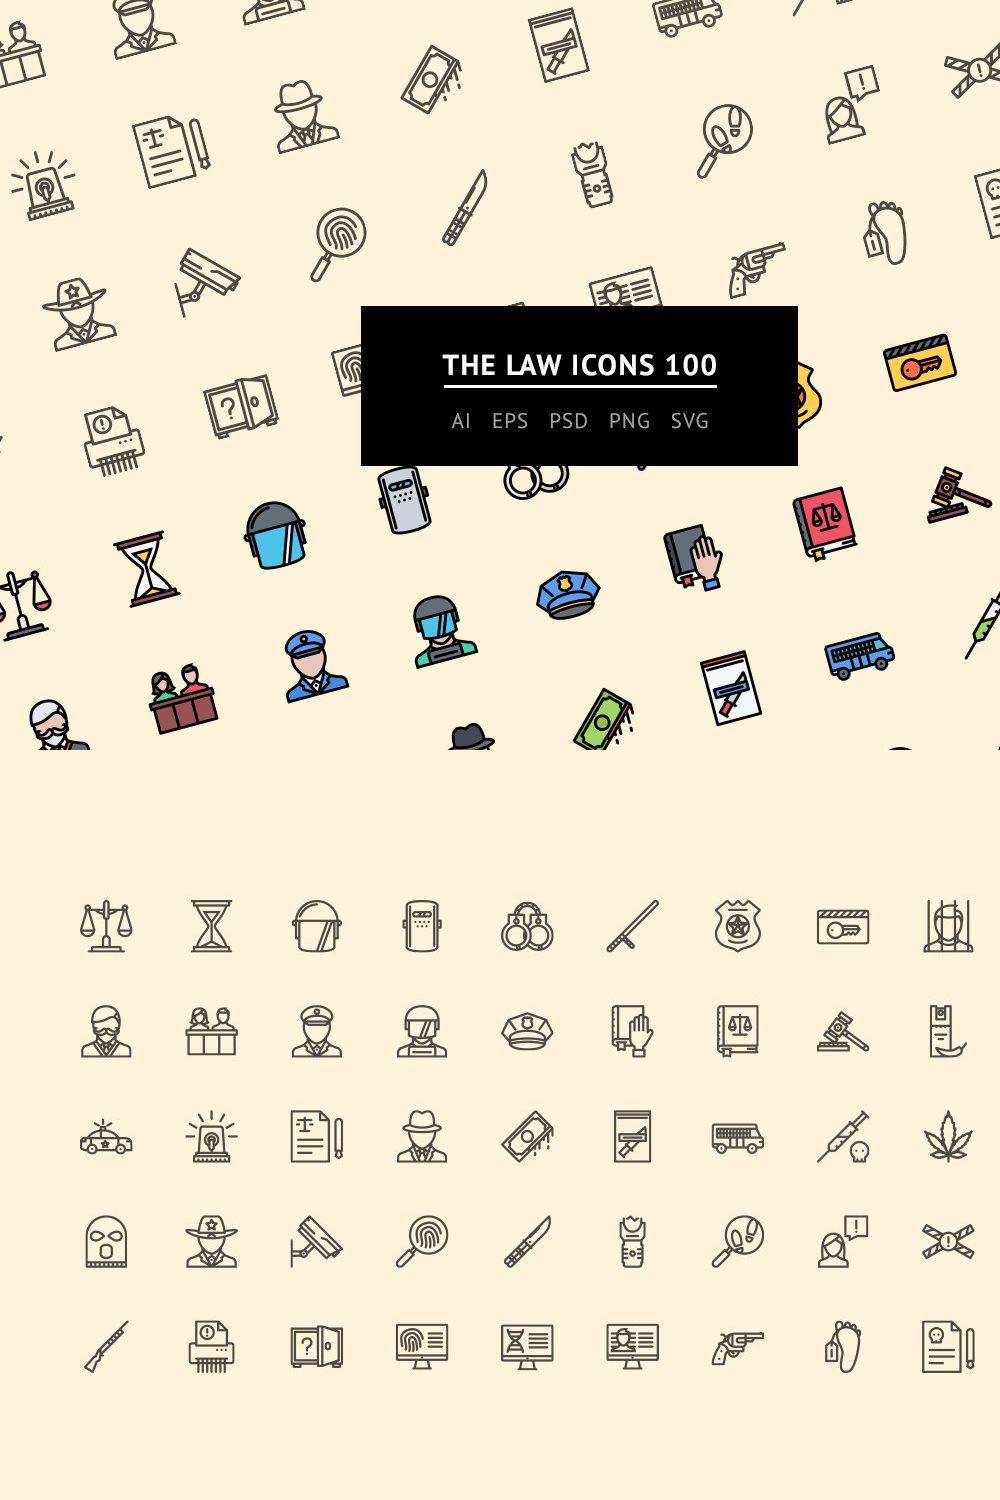 The Law Icons 100 pinterest preview image.